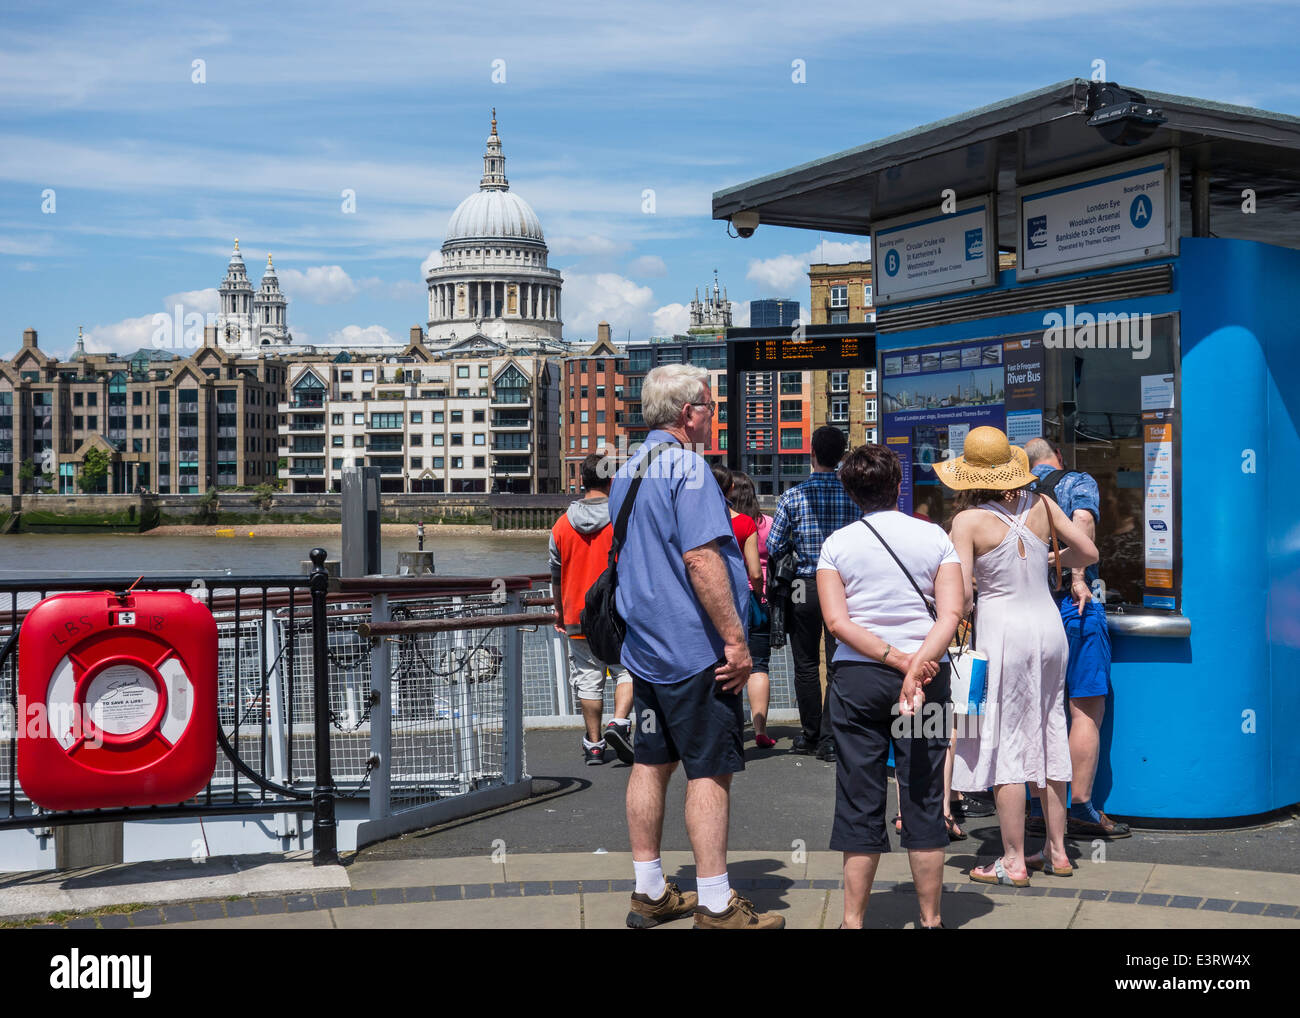 People queuing at kiosk for boat trips River Thames London Stock Photo